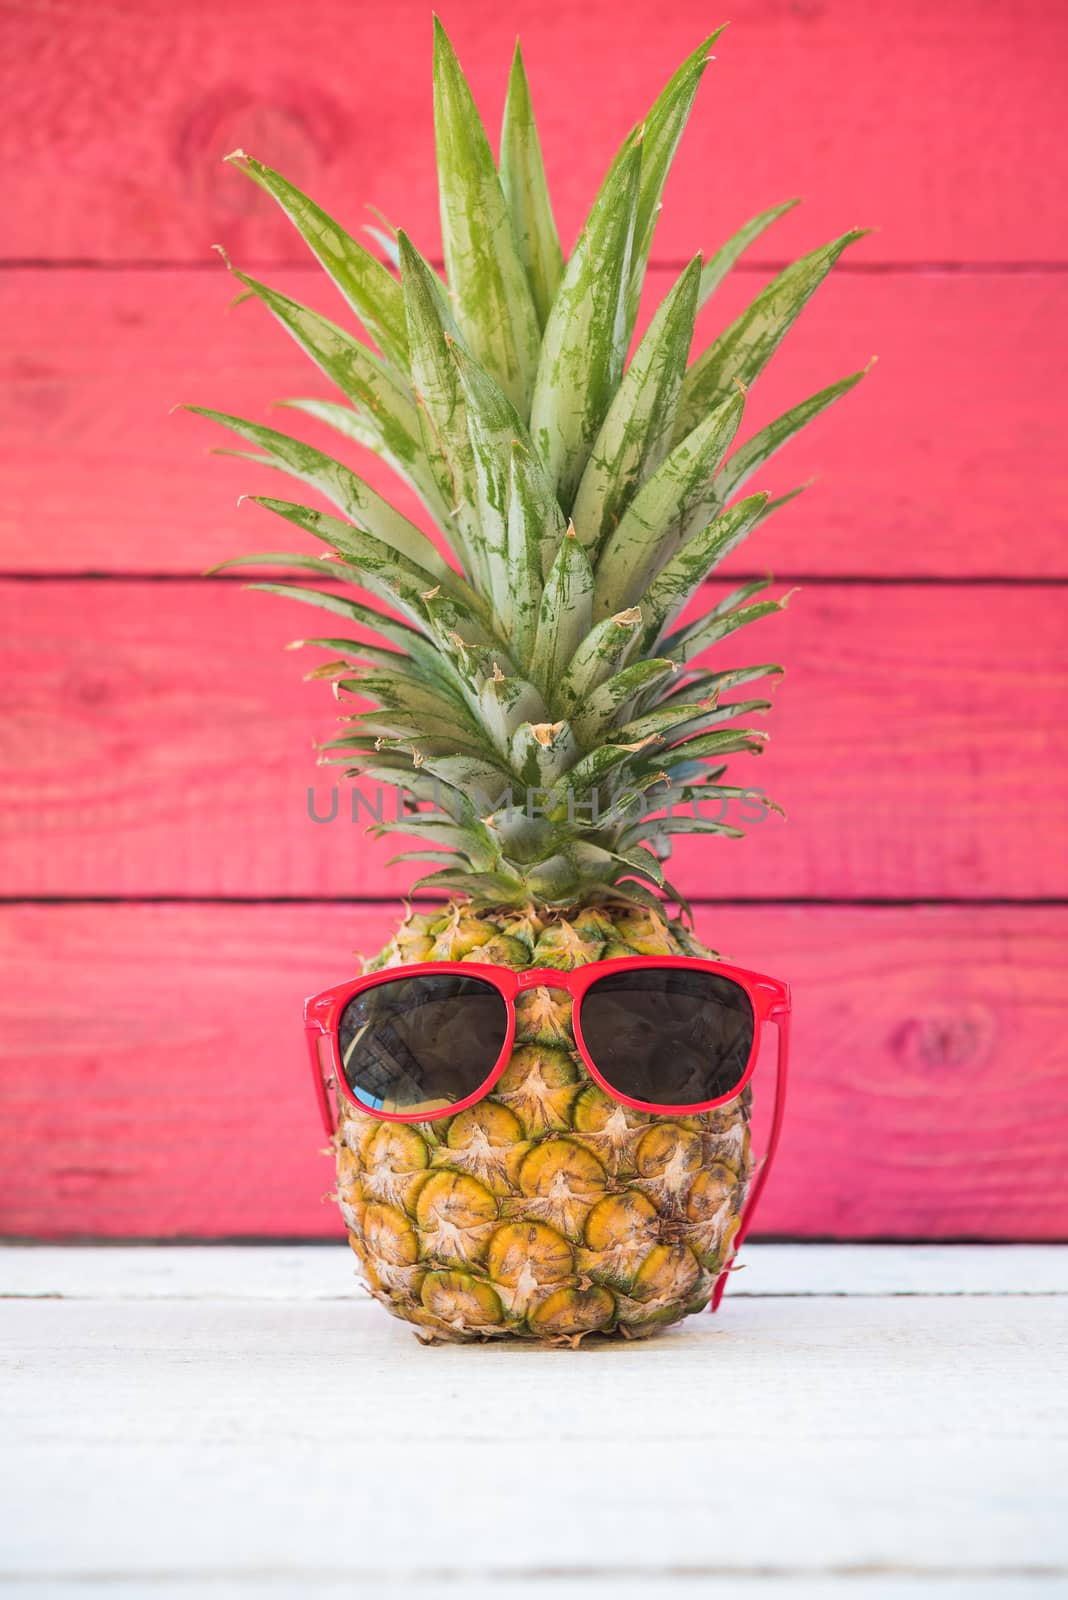 Holiday pineapple on red wooden background by Sorapop